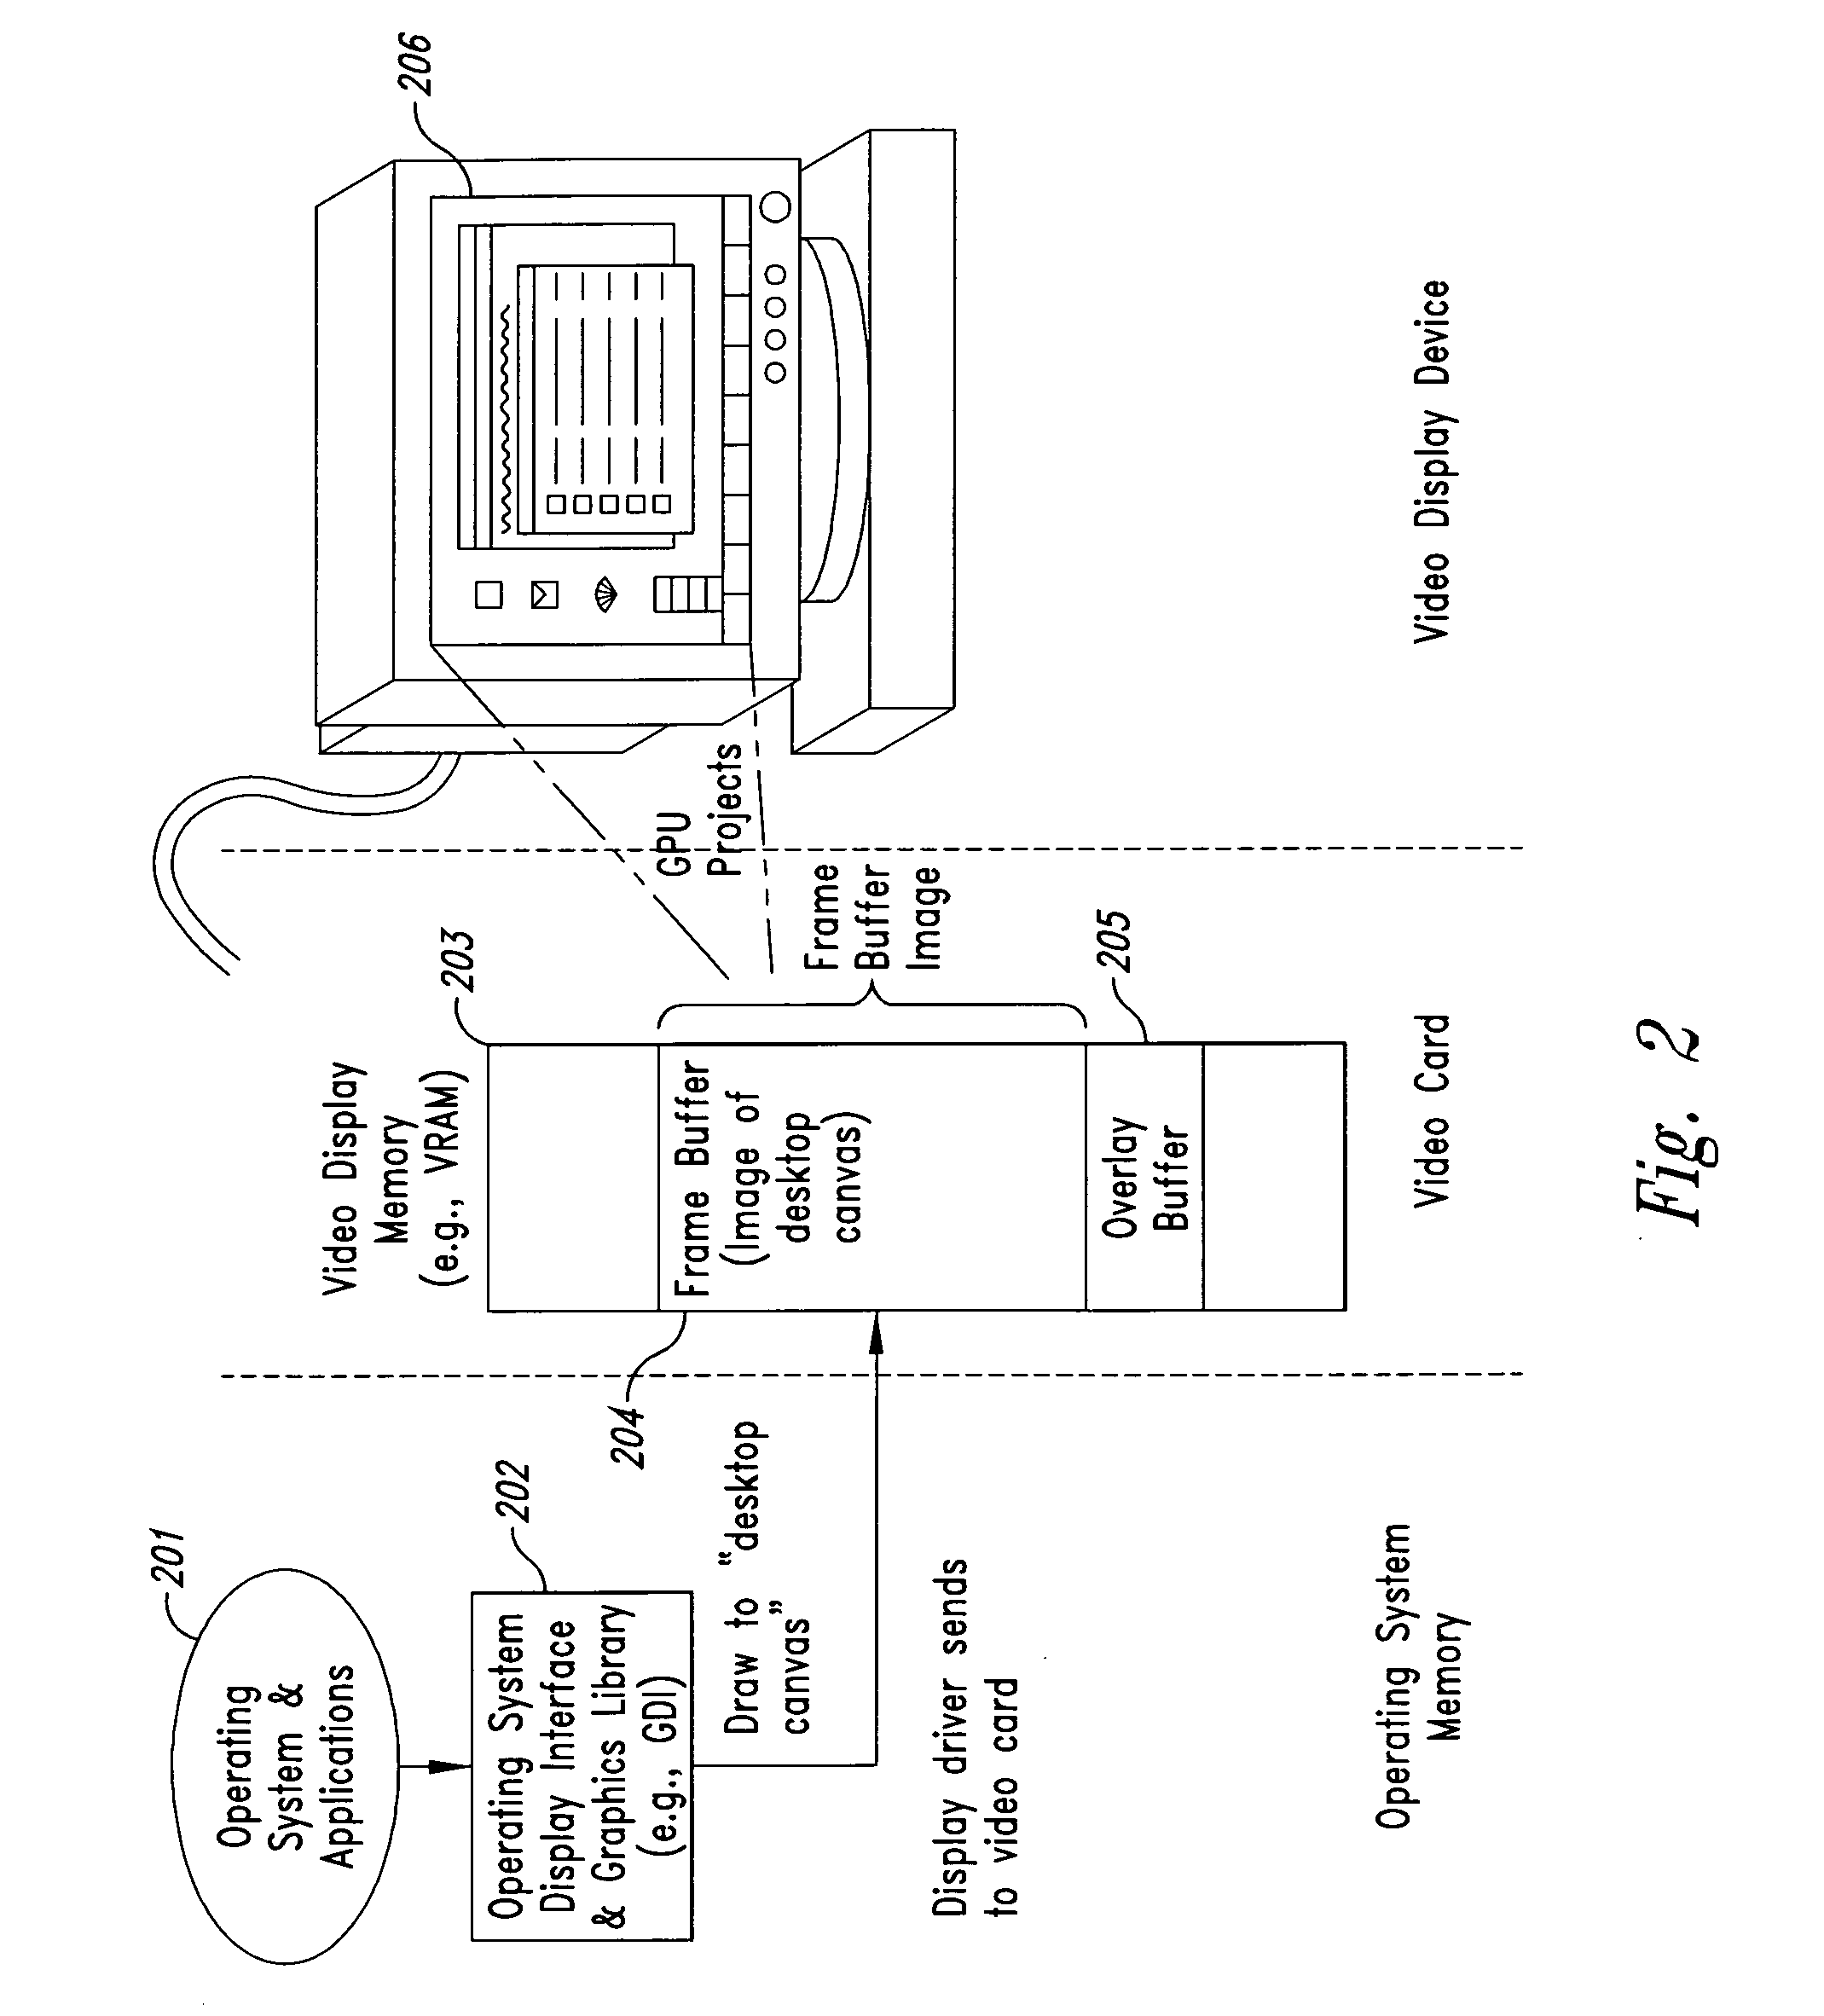 Method and system for maintaining secure data input and output